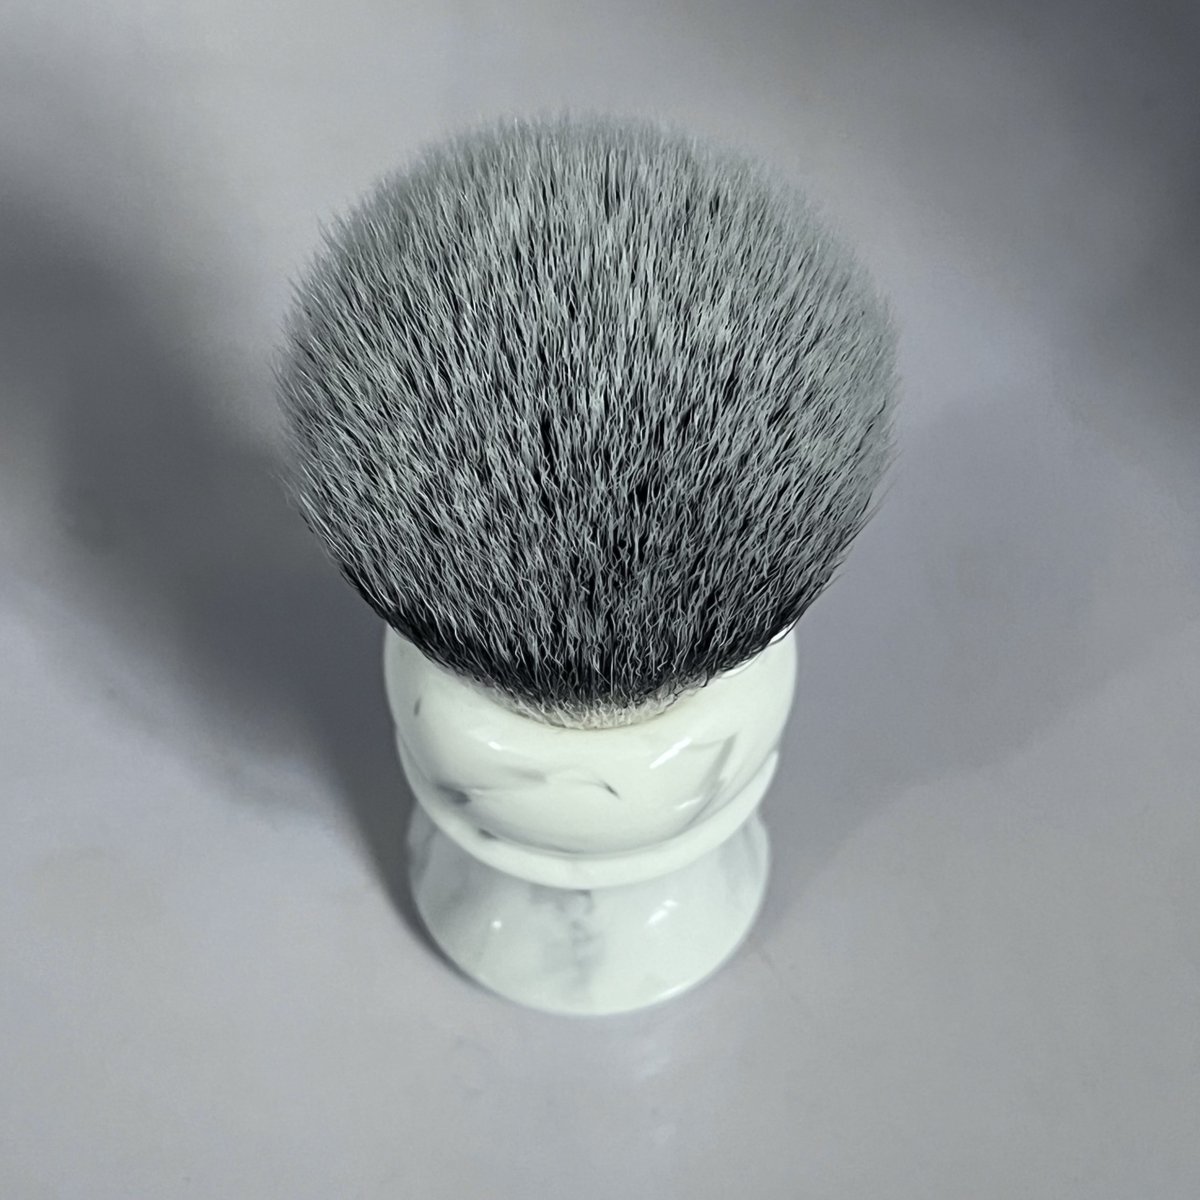 YAQI Everest 24mm White Marble Travel Shaving Brush 
Material: synthetic hair bristles + Marble Color Resin Handle 
Brush knot diameter: 24MM (+/-1mm)
Loft size: 52mm (+/-1mm)

#shave #shaveoftheday #shaving #yaqi #yaqibrush #wetshaving #wetshavers  #shavingbrush